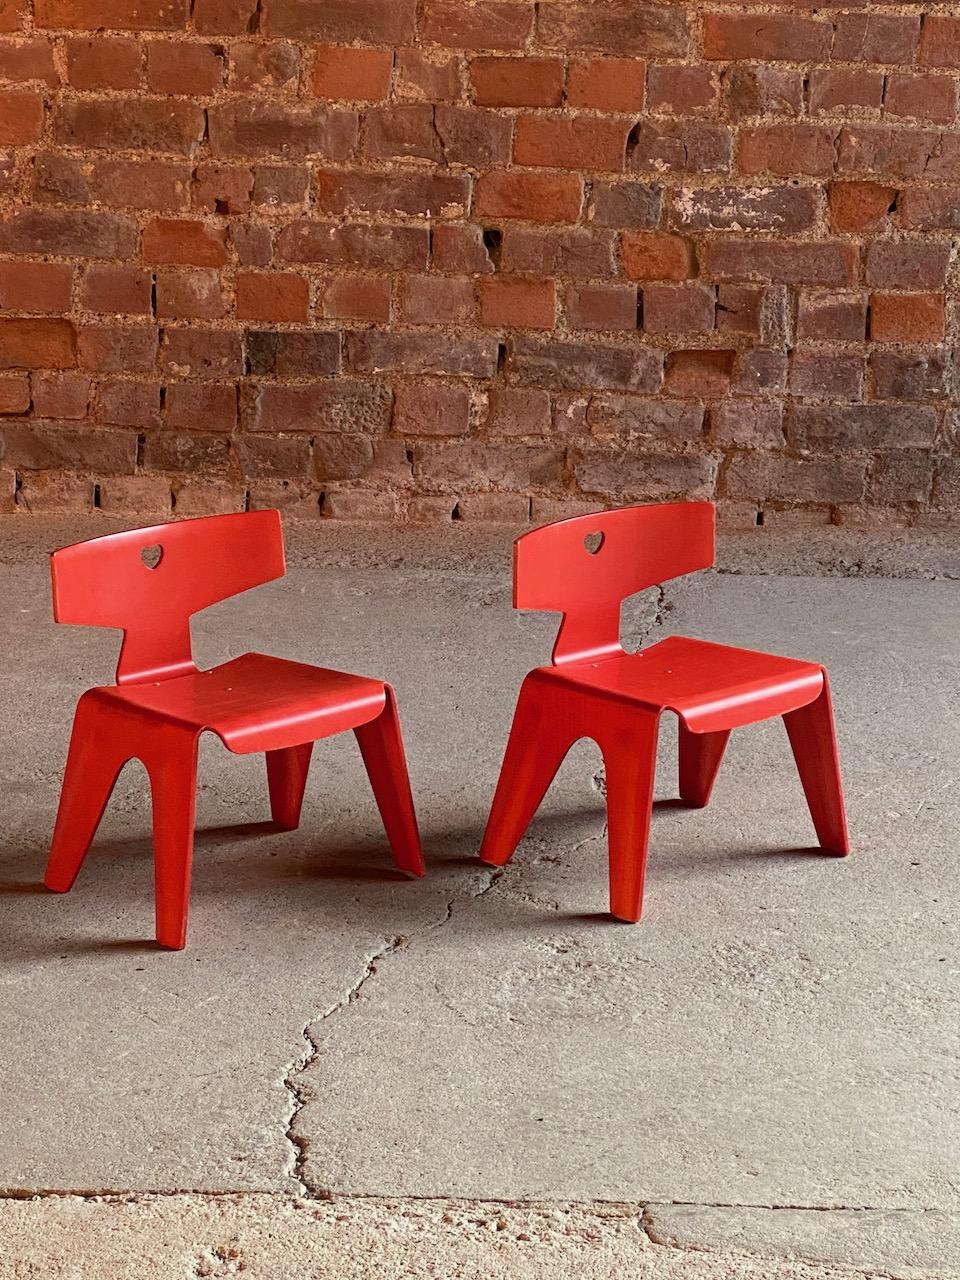 Charles and Ray Eames children's chairs, 2004

Super rare Charles and Ray Eames children’s chairs originally designed in 1945, perfectly moulded birch wood construction, the backrests pierced with heart motifs, in red dyed finish with applied